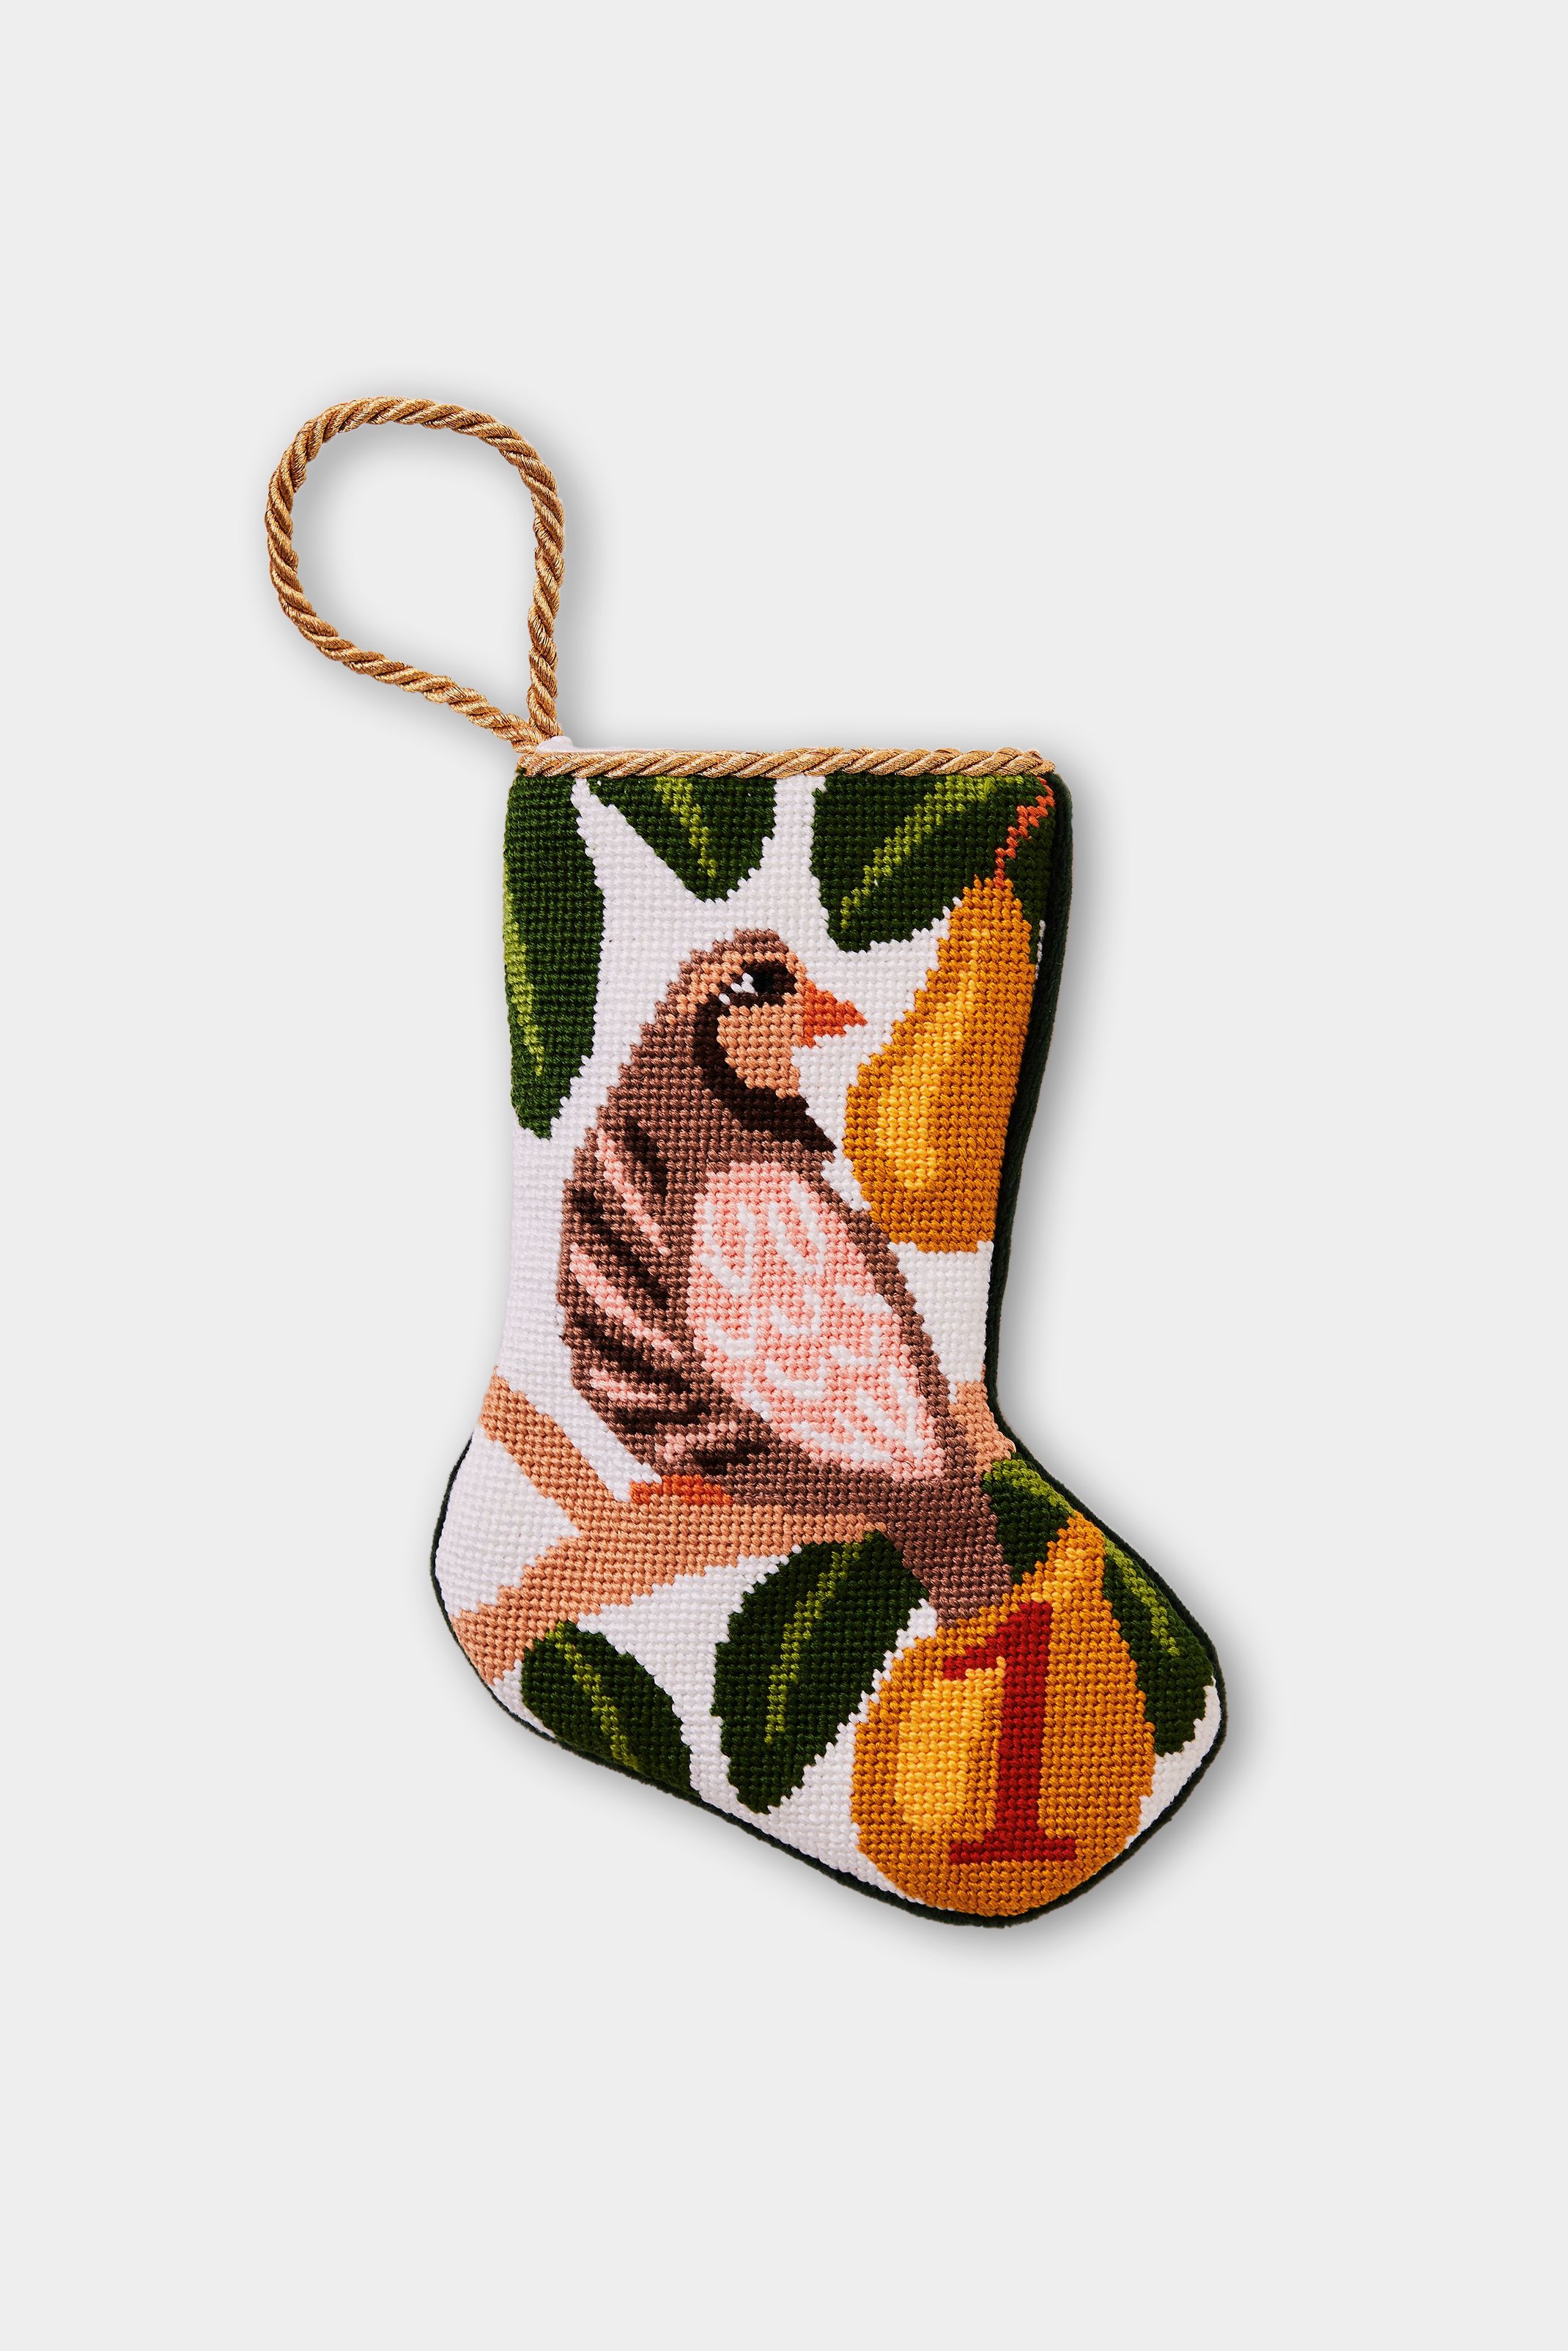 12 Days of Christmas Yarn: And a partridge in a pear tree/65 yrd